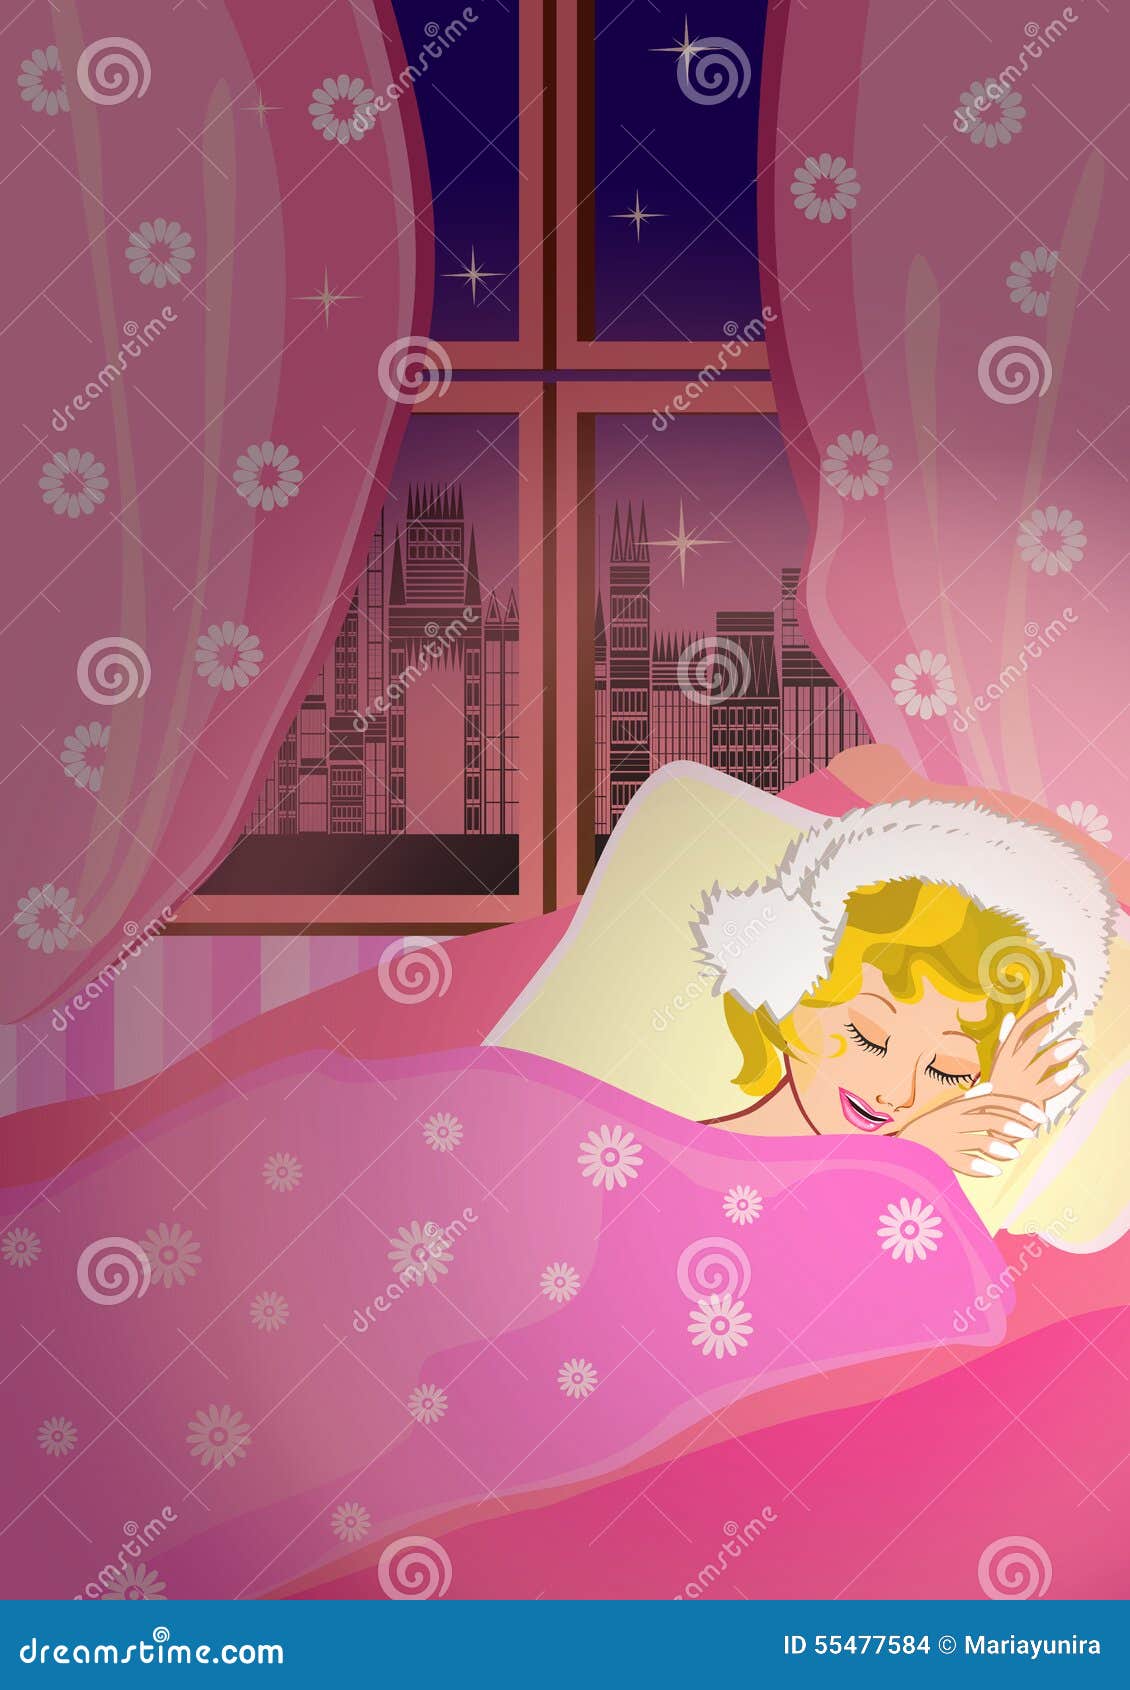 clipart girl in bed - photo #41